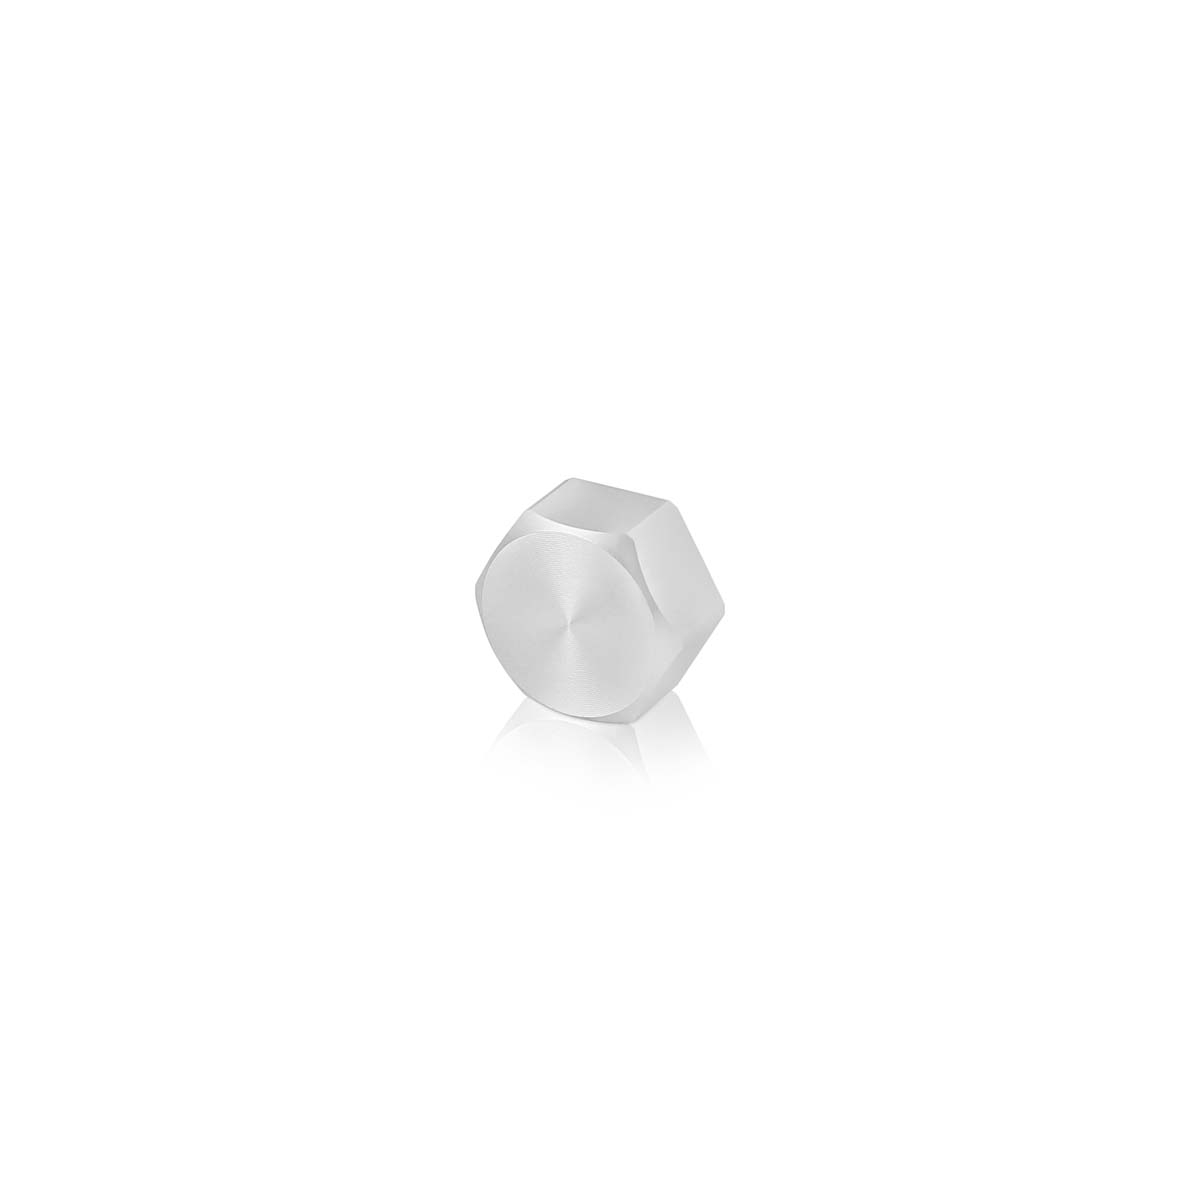 5/16-18 Threaded Hex 3/4'' Caps, Height: 3/8'', Clear Anodized Aluminum [Required Material Hole Size: 3/8'']